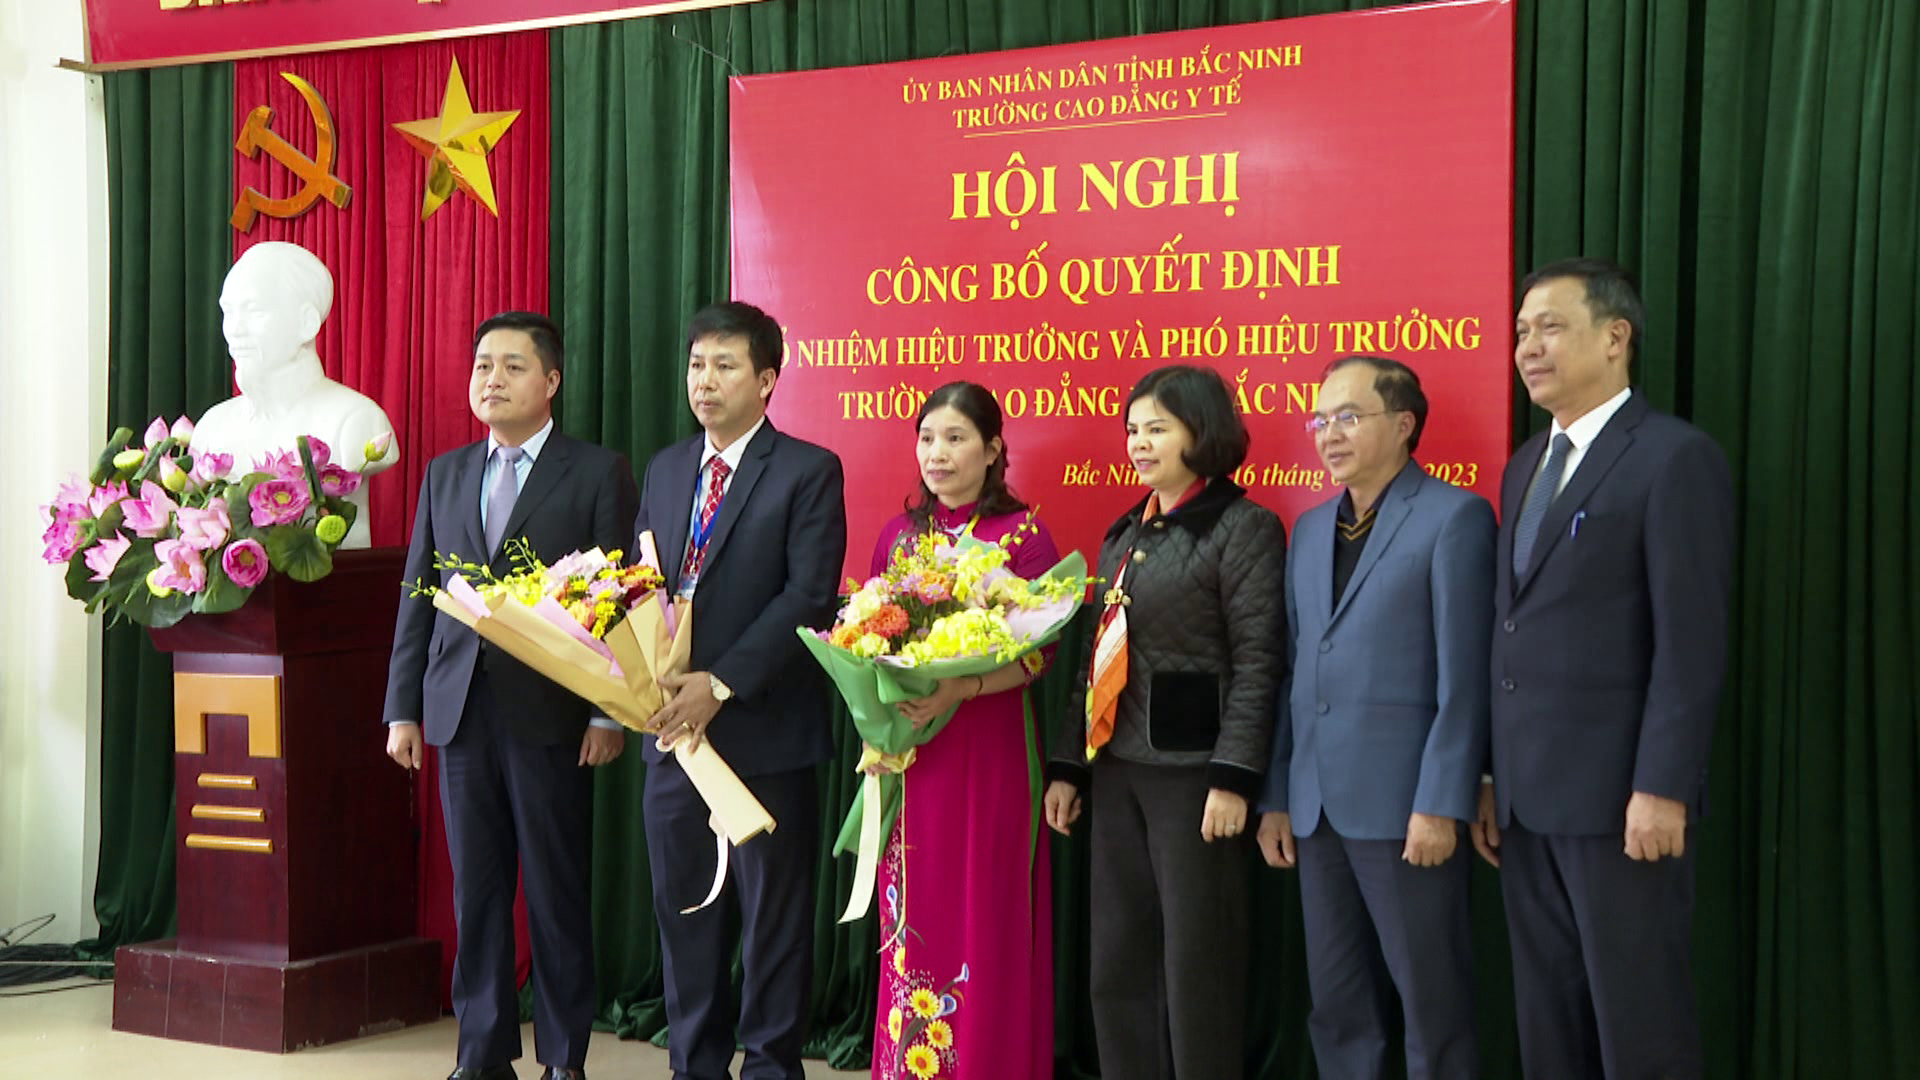 Chu_tich_trao_quyet_dinh_truong_y(1).png